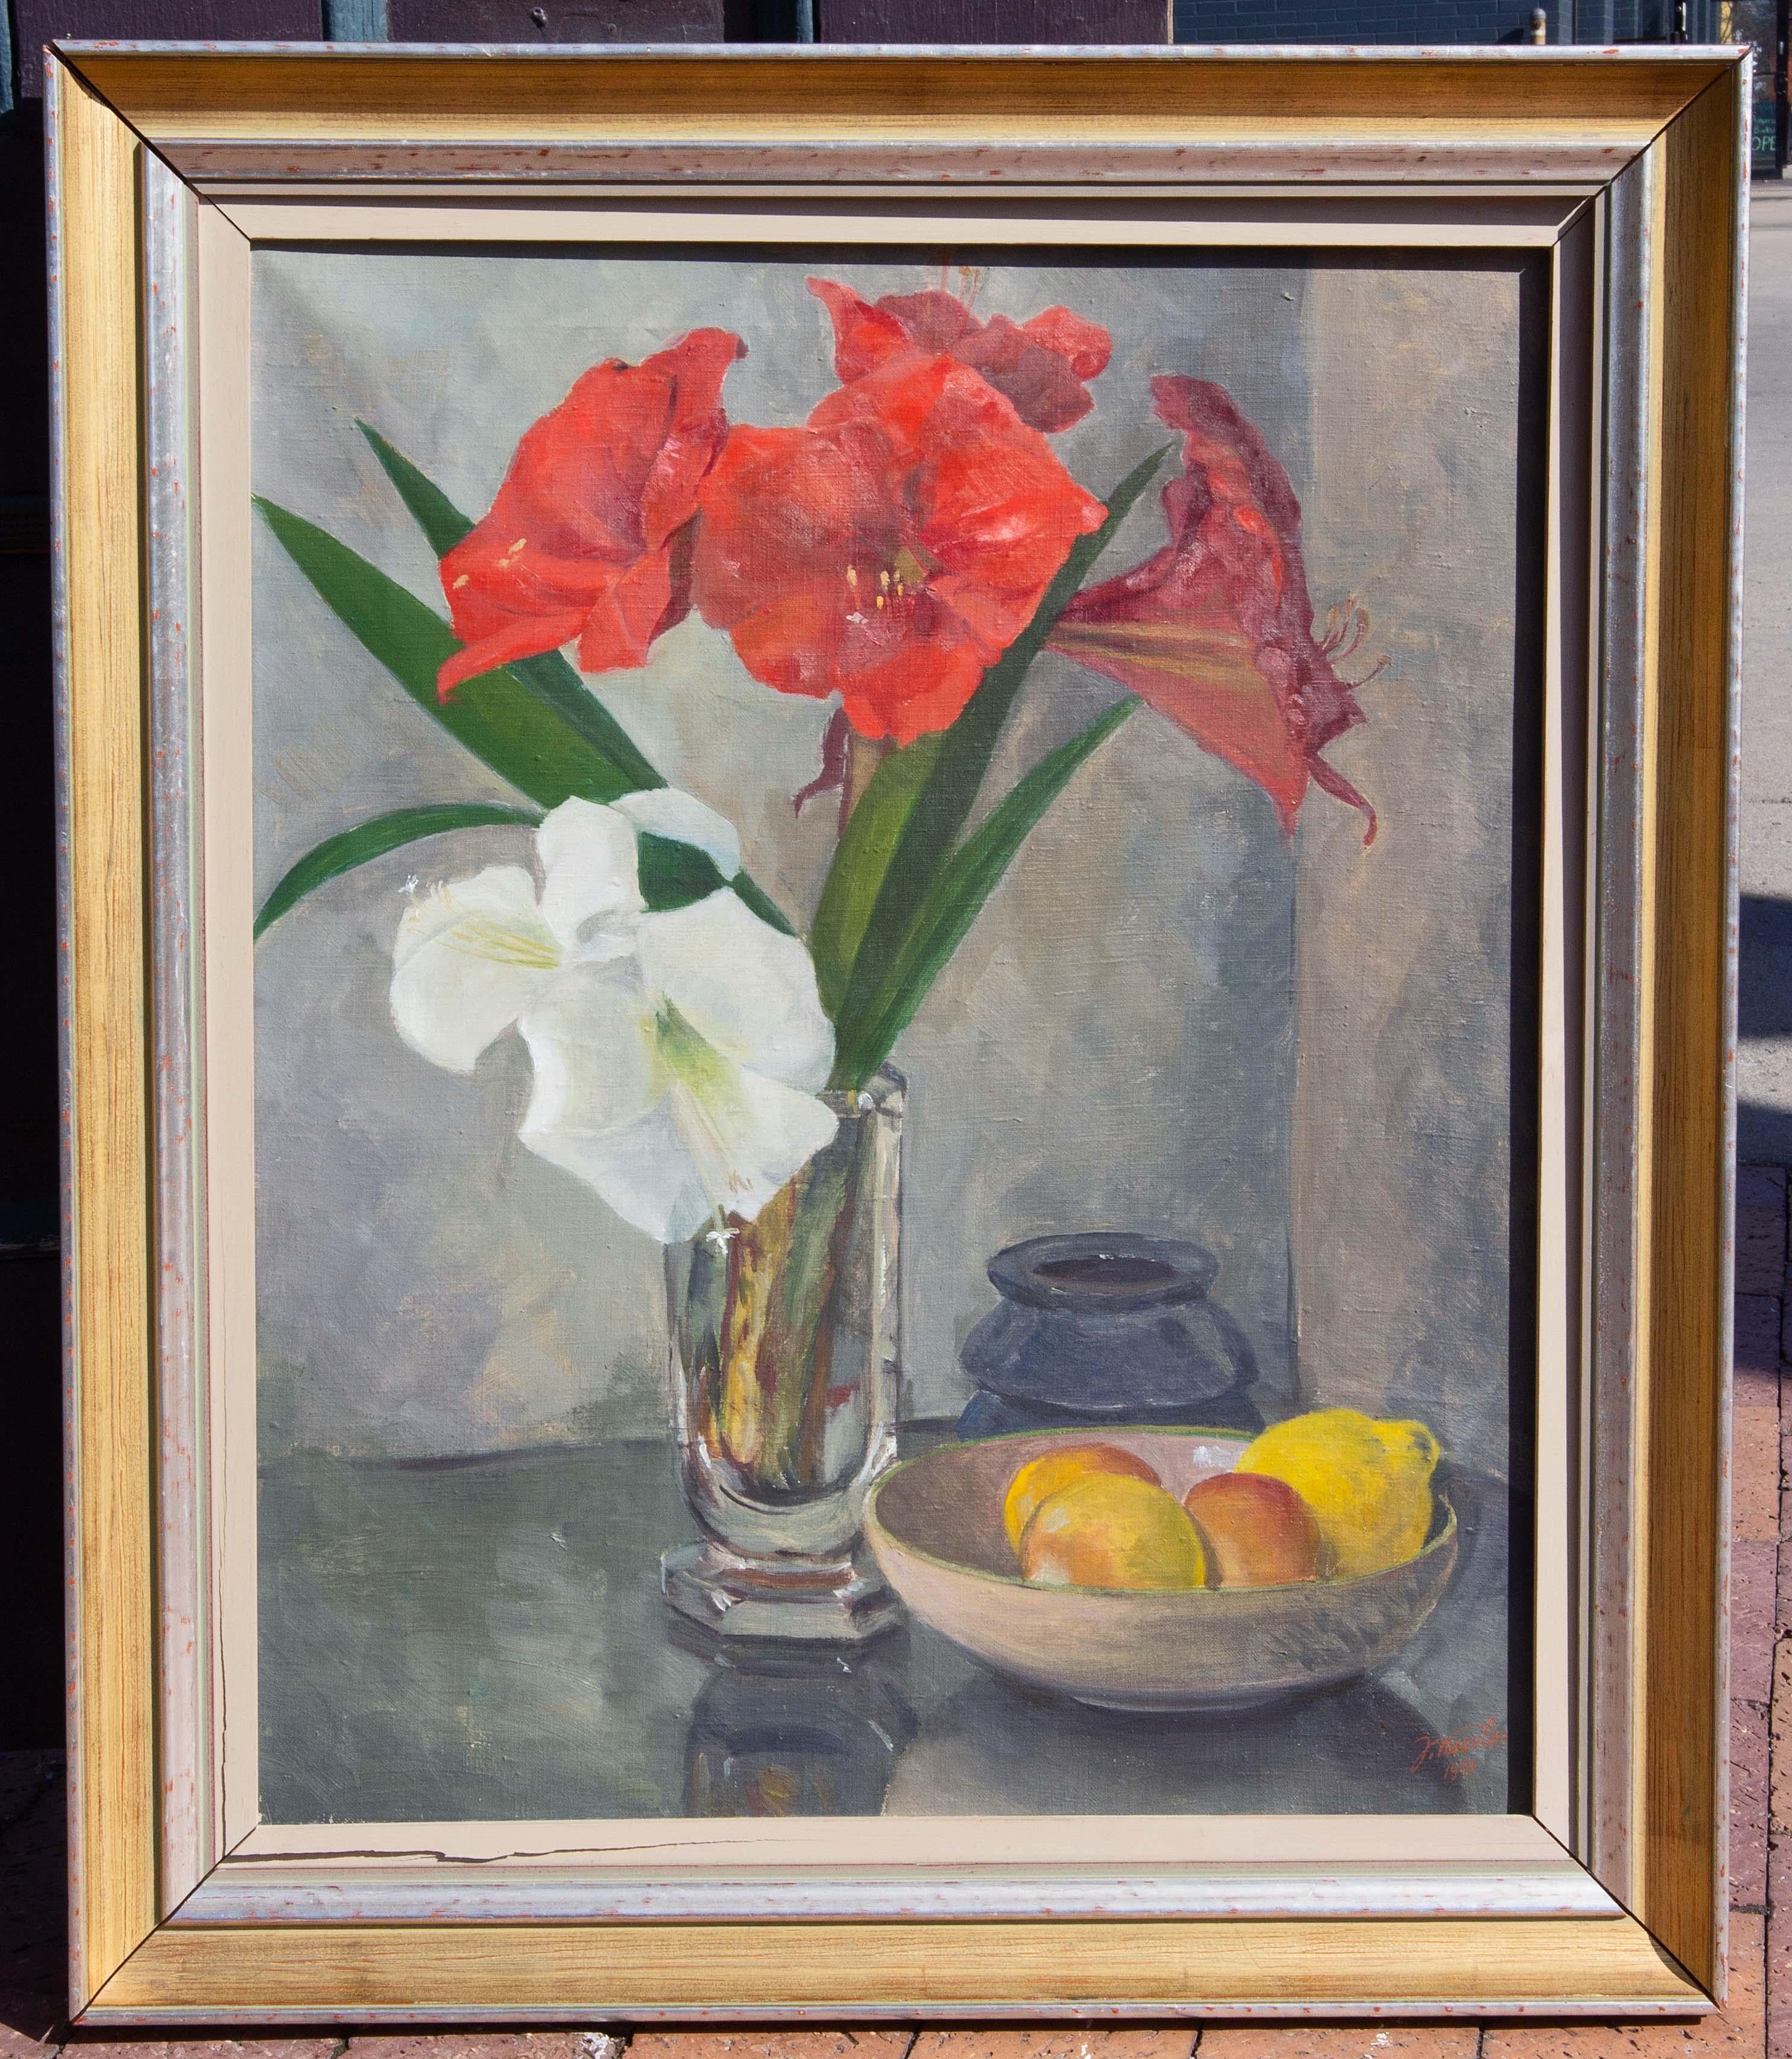 Vintage mid century floral still life. Beautiful colors. Oil on canvas. Signed Nessler. Dated 1951.